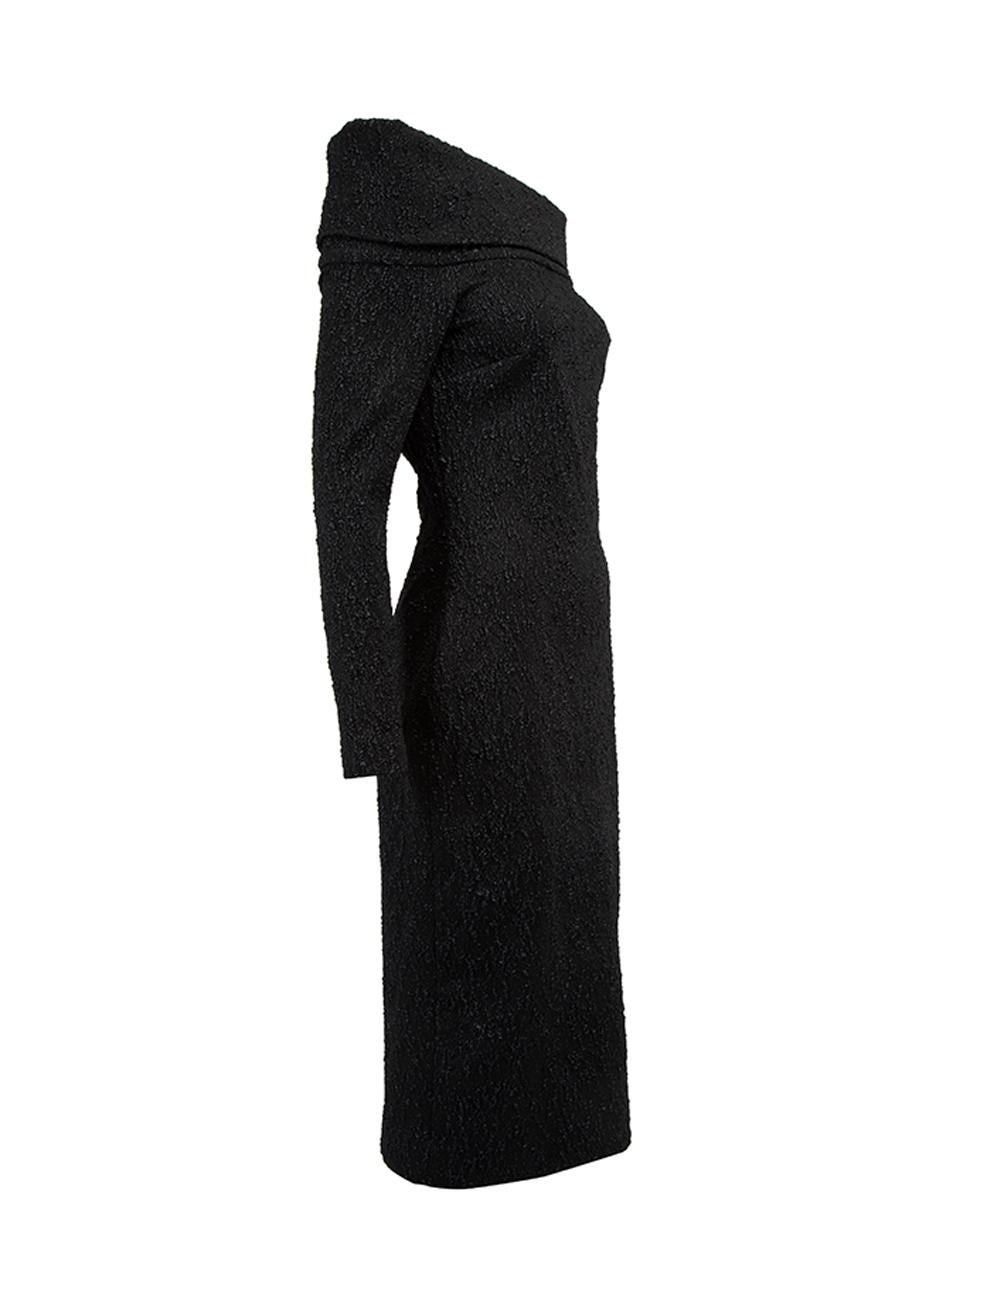 CONDITION is Never worn, with tags. No visible wear to dress is evident to this new Oscar De La Renta designer resale item.  Details  Black Synthetic Off the shoulder dress Textured Midi length Long sleeves Back zip closure Fully lined with silk  